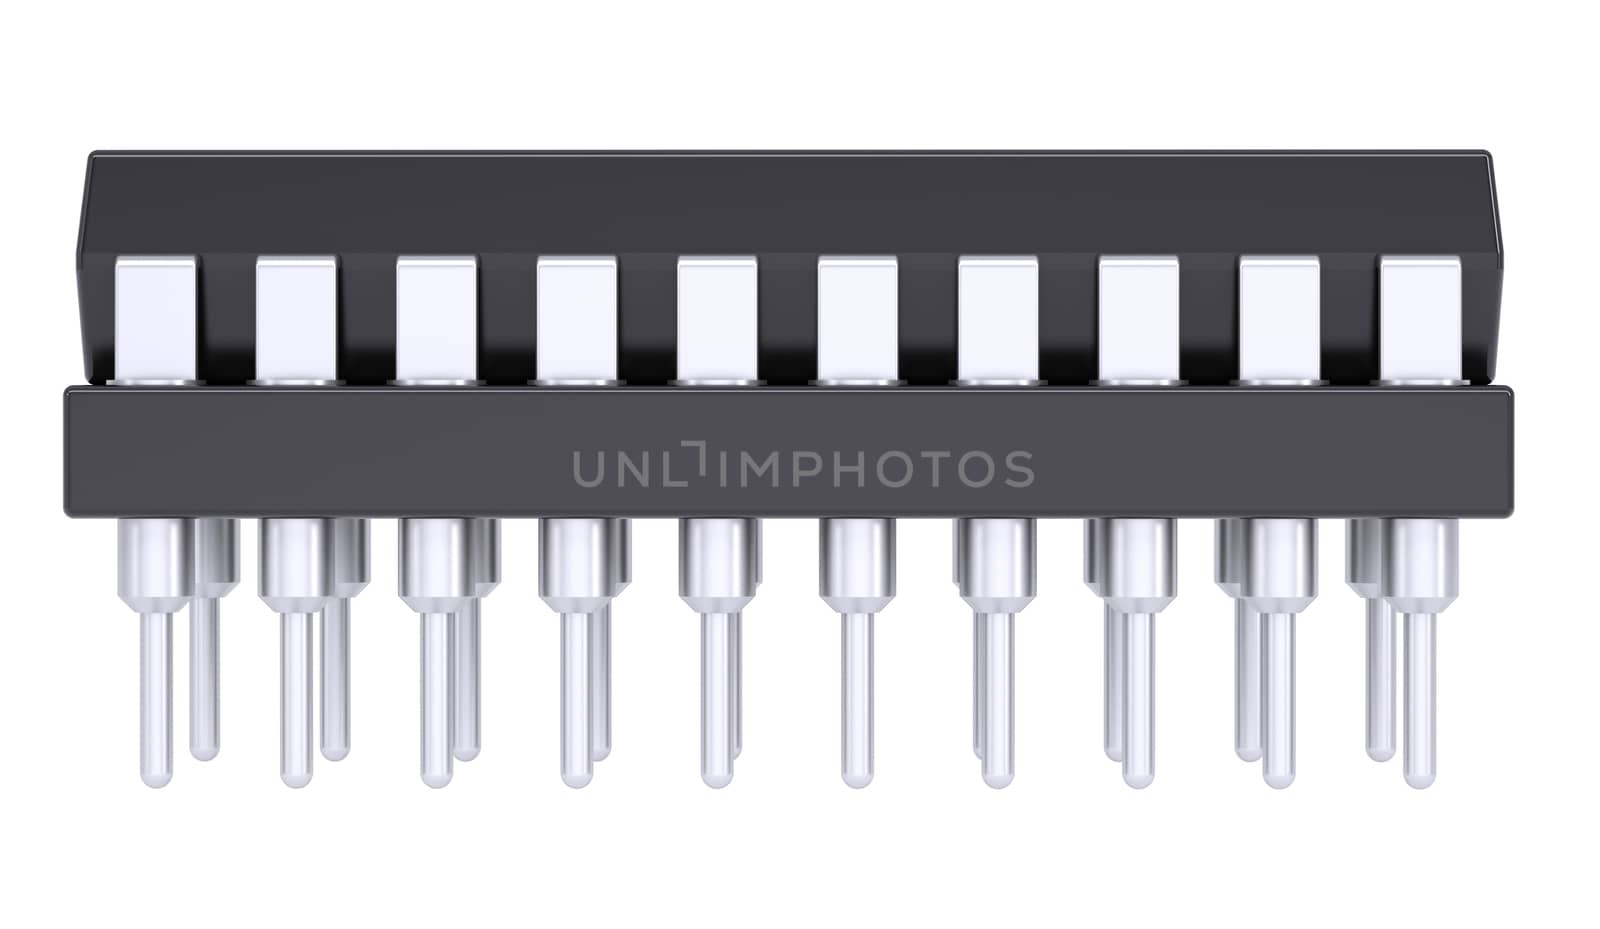 Microchip. Isolated render on a white background